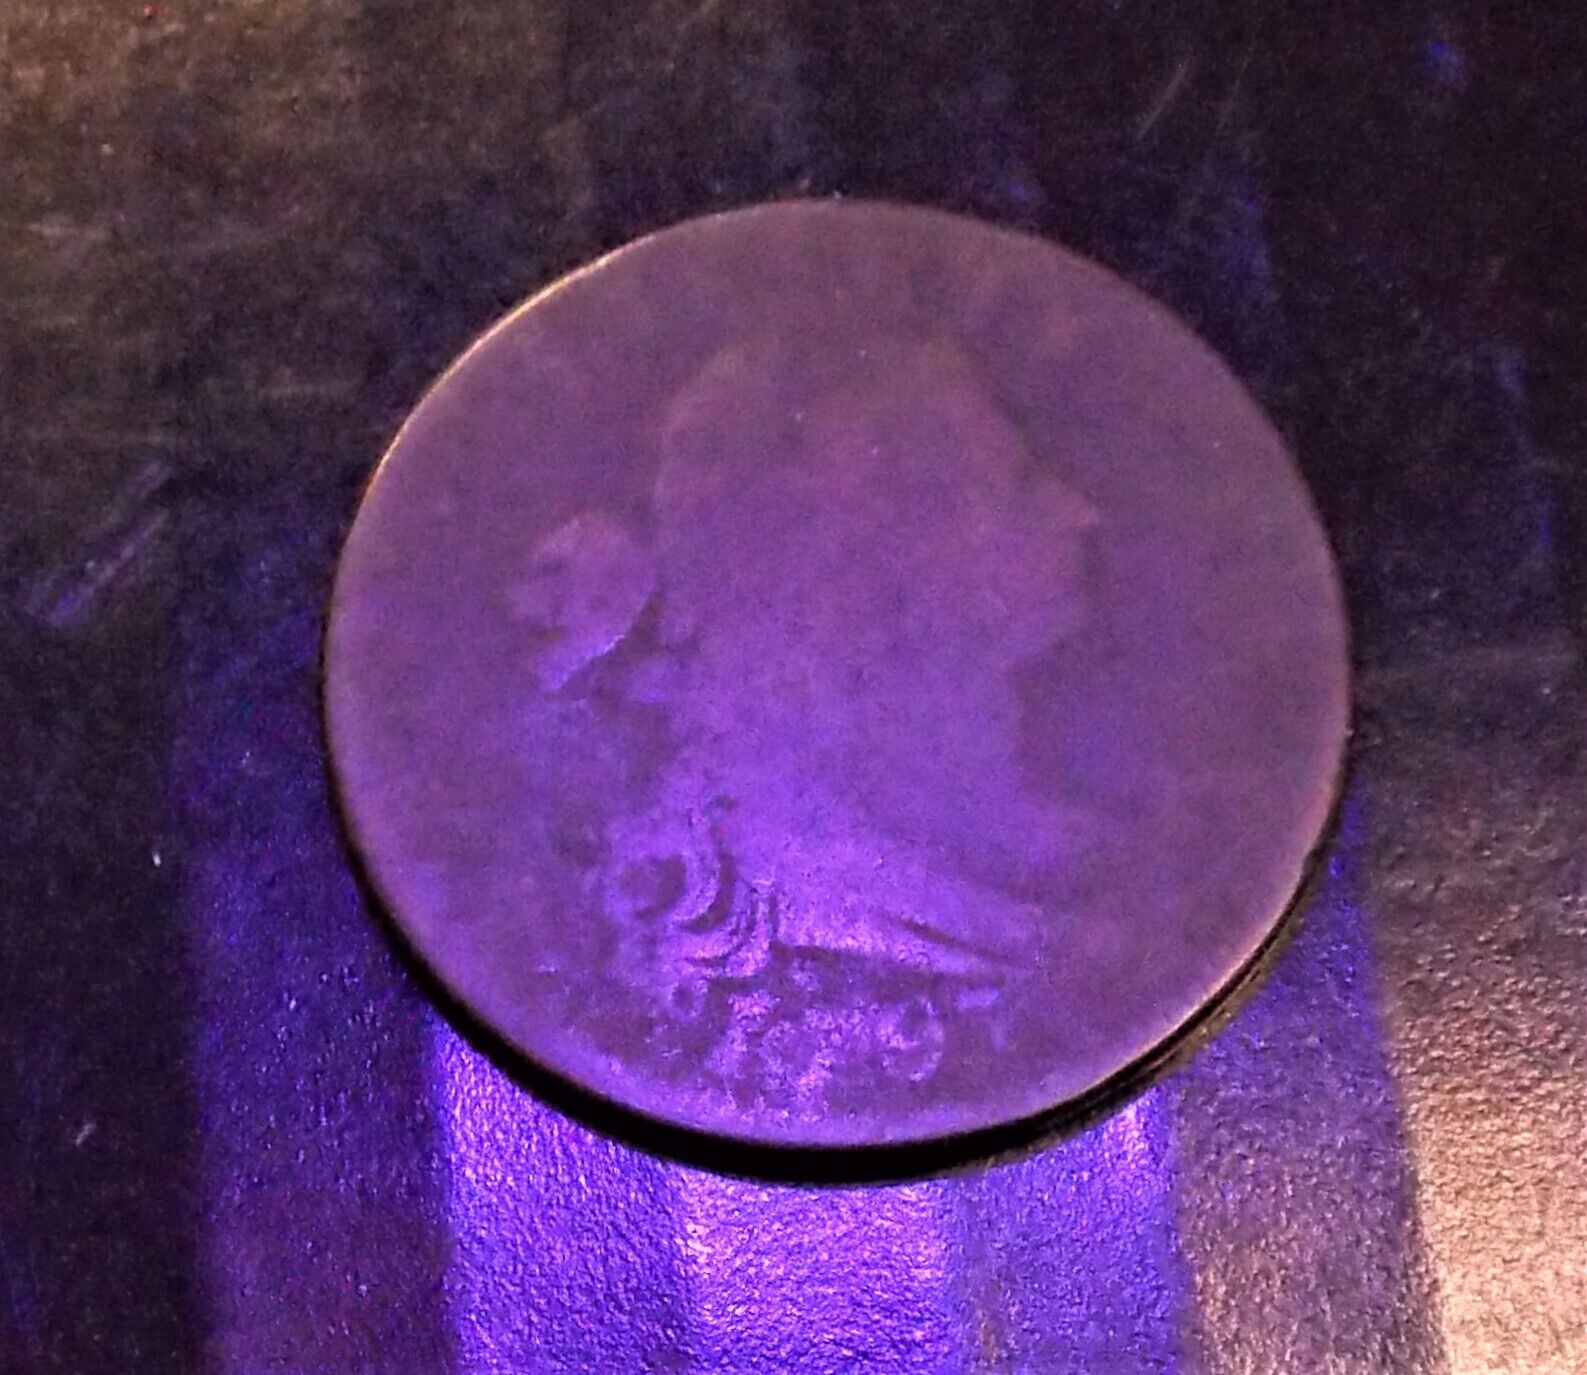 1797 LARGE U.S. CENT COIN,  A 225 YEAR OLD COIN, FROM 64 YEARS BEFORE CIVIL WAR